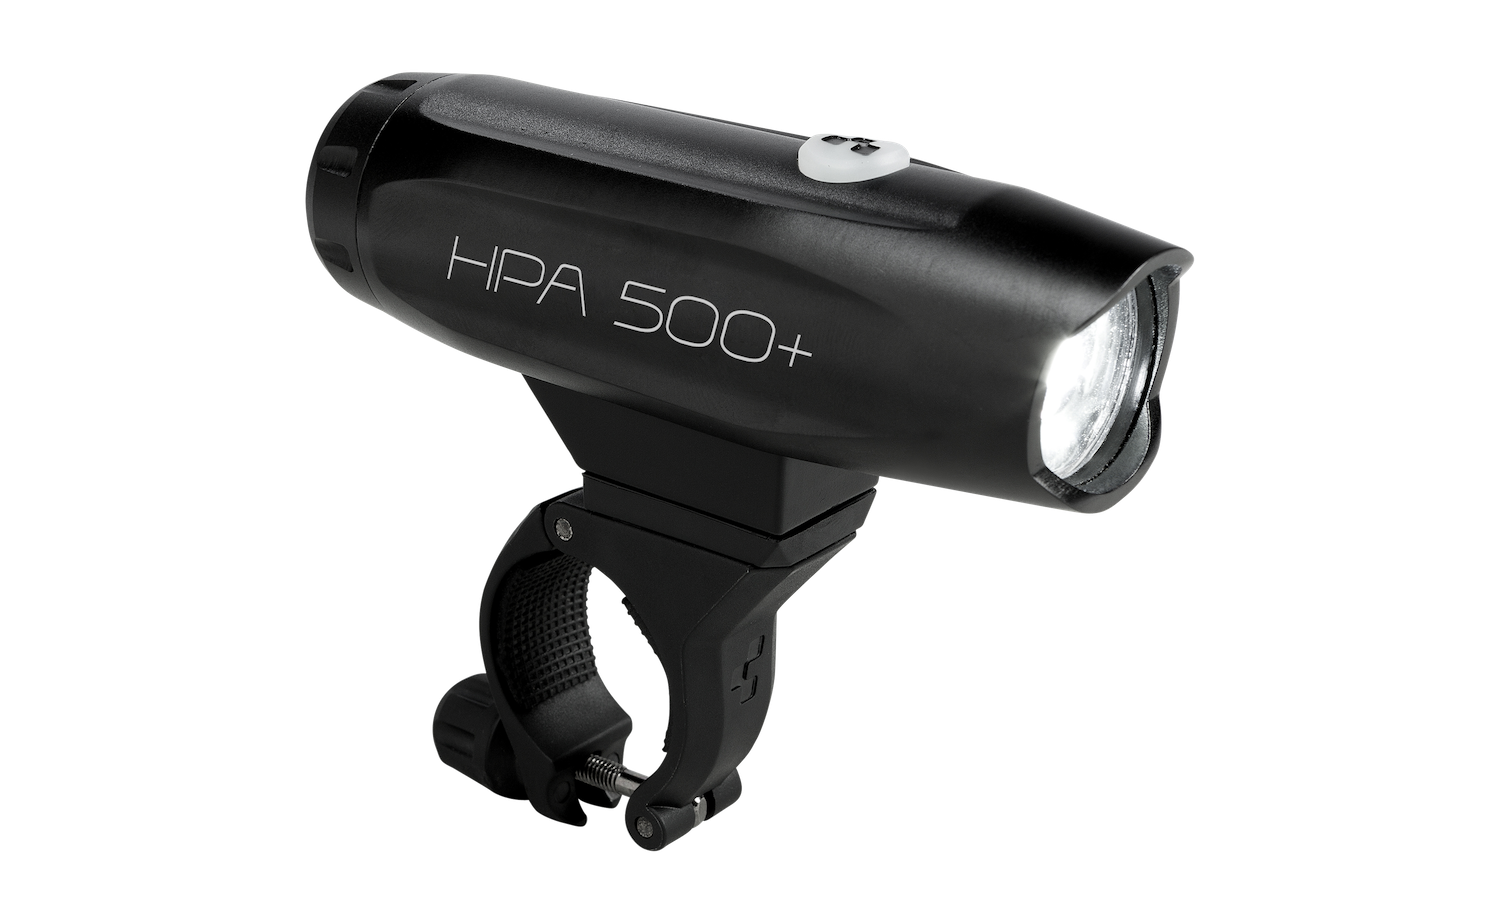 CUBE LED Licht HPA 500+